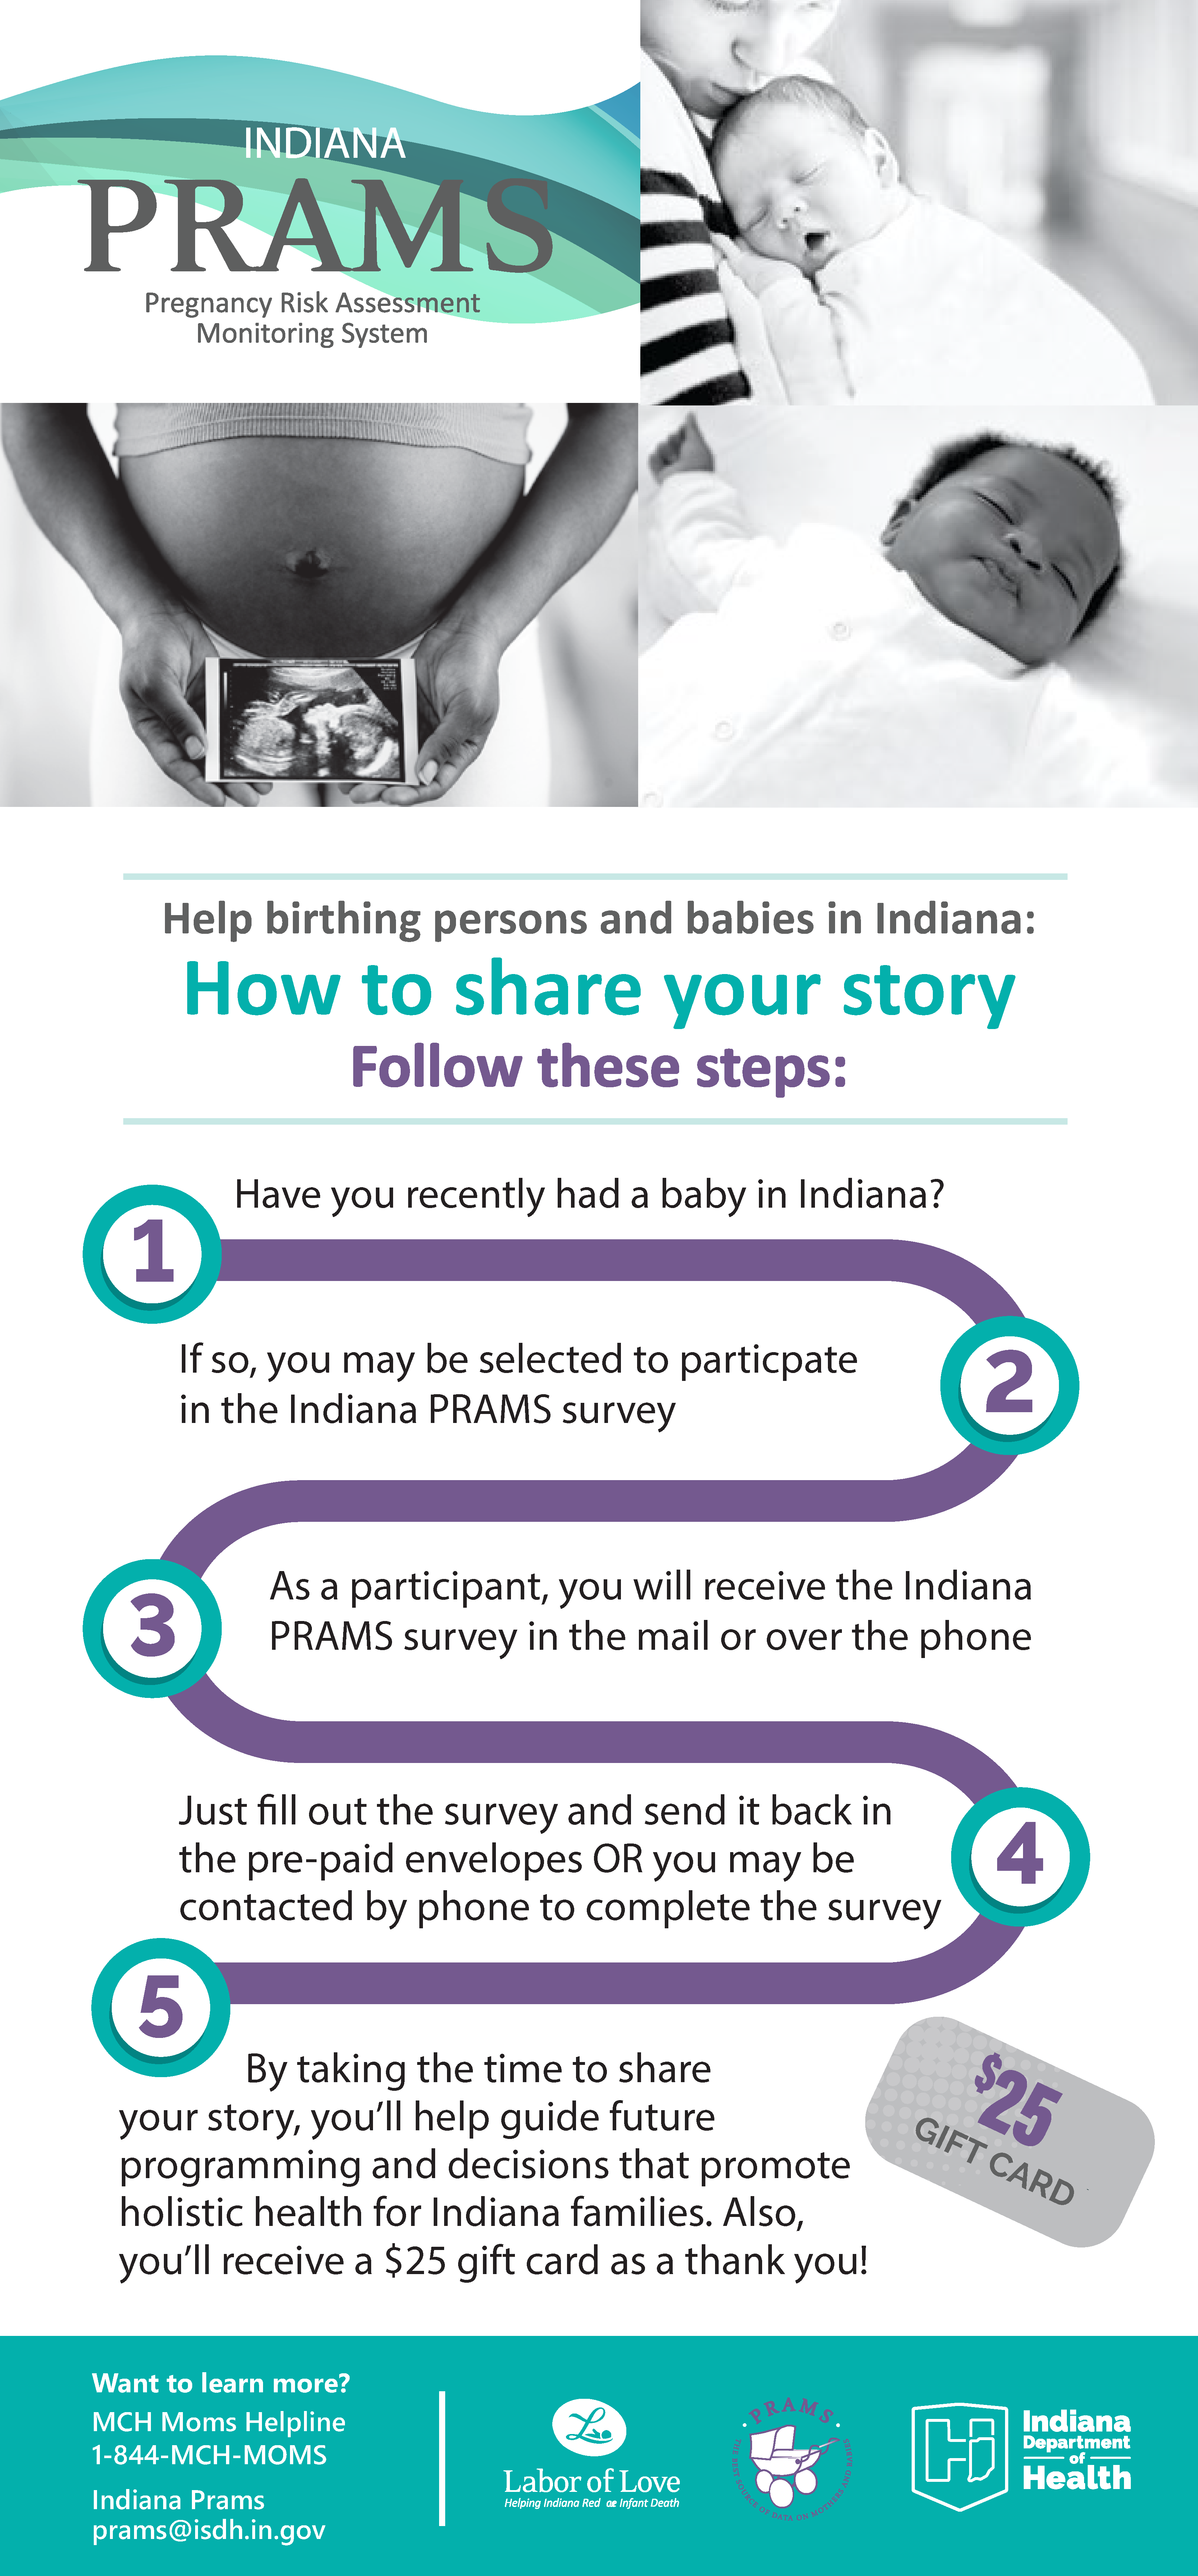 Help birthing persons and babies in Indiana by sharing your story. Have you recently had a baby in Indiana? If so, you may be selected to participate in the Indiana PRAMS survey. Just fill out the survey and sent it back in the pre-paid envelopes or you may be contacted by phone to complete the survey. By taking the time to share your story, you'll help guide future programming and decisions that promote holistic health for Indiana families. Also, you'll receive a $25 giftcard as a thank you. 